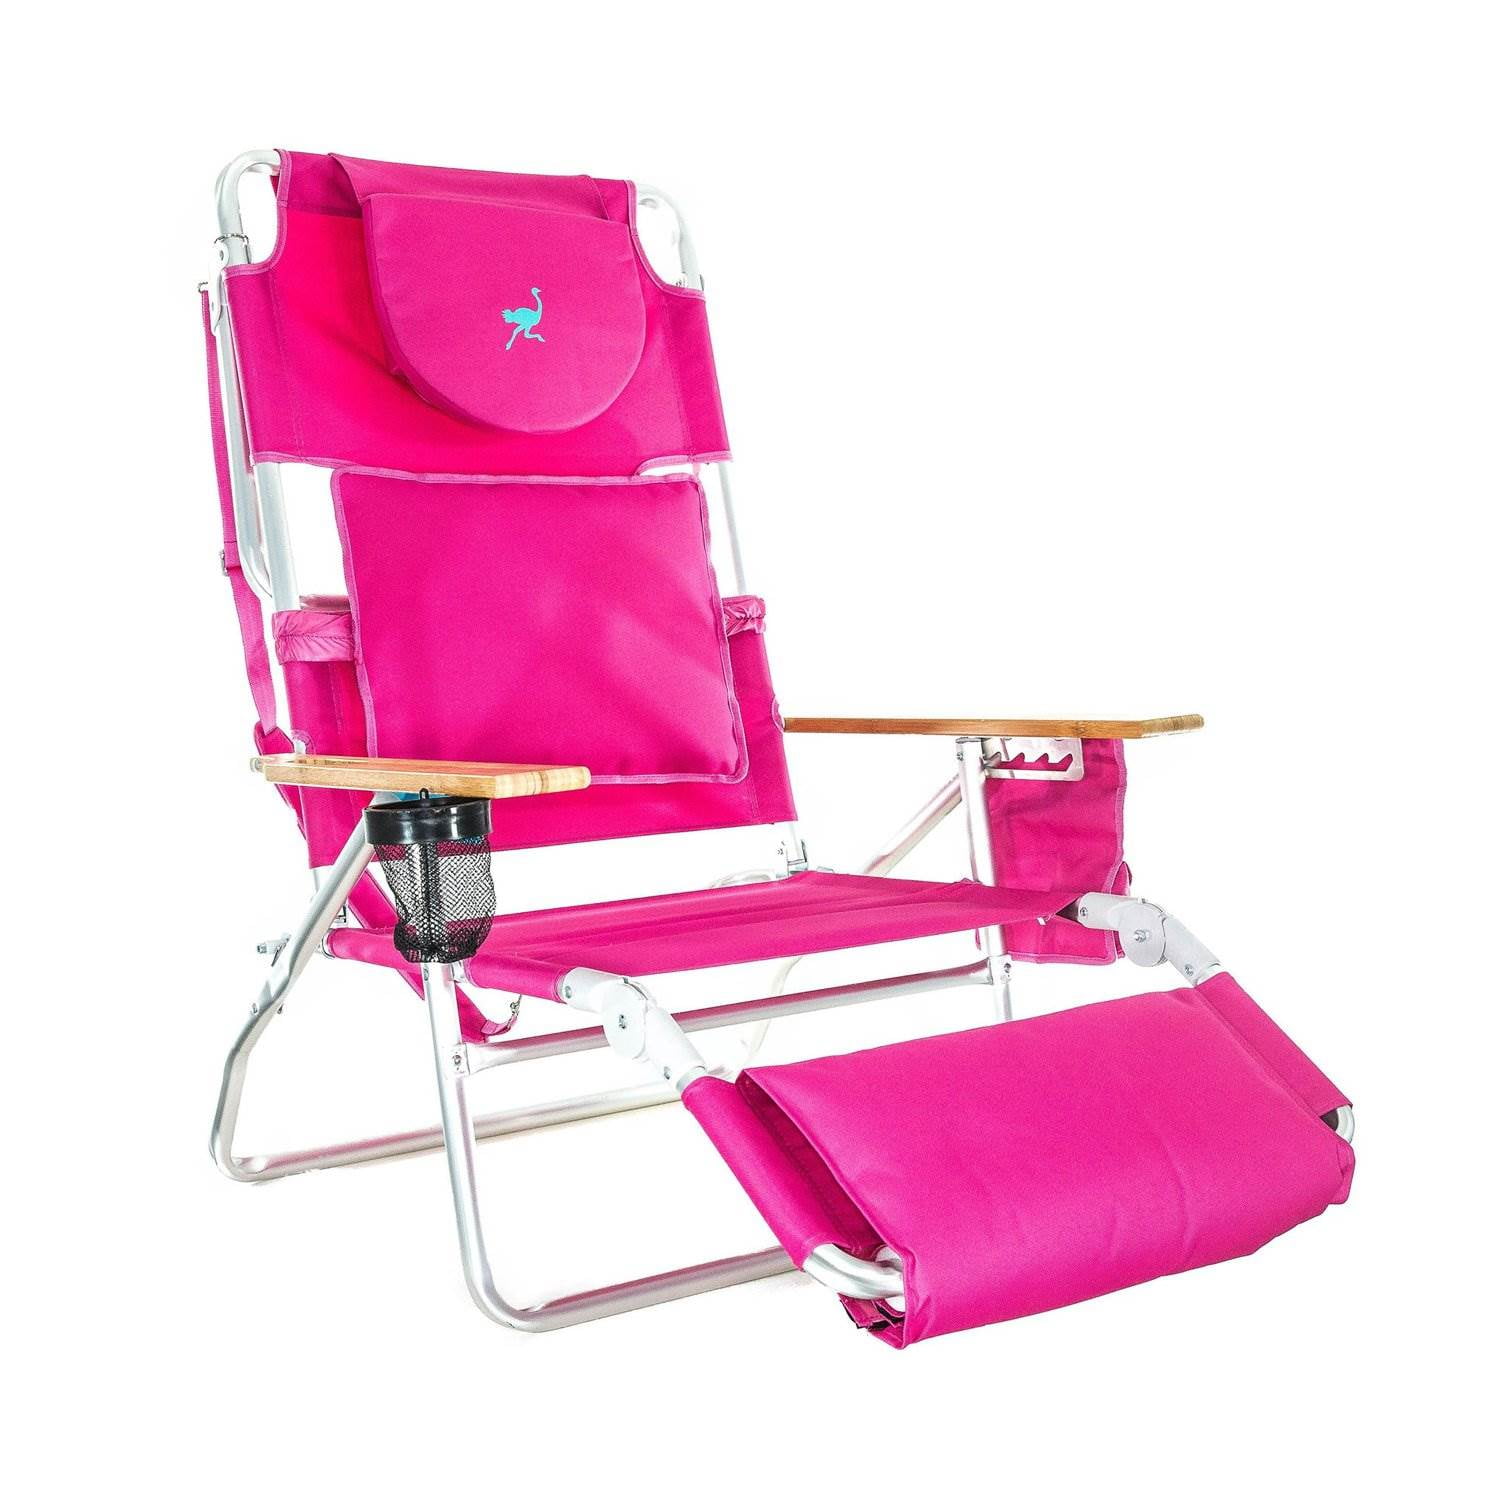  Ostrich 3 In 1 Beach Chair Review for Large Space